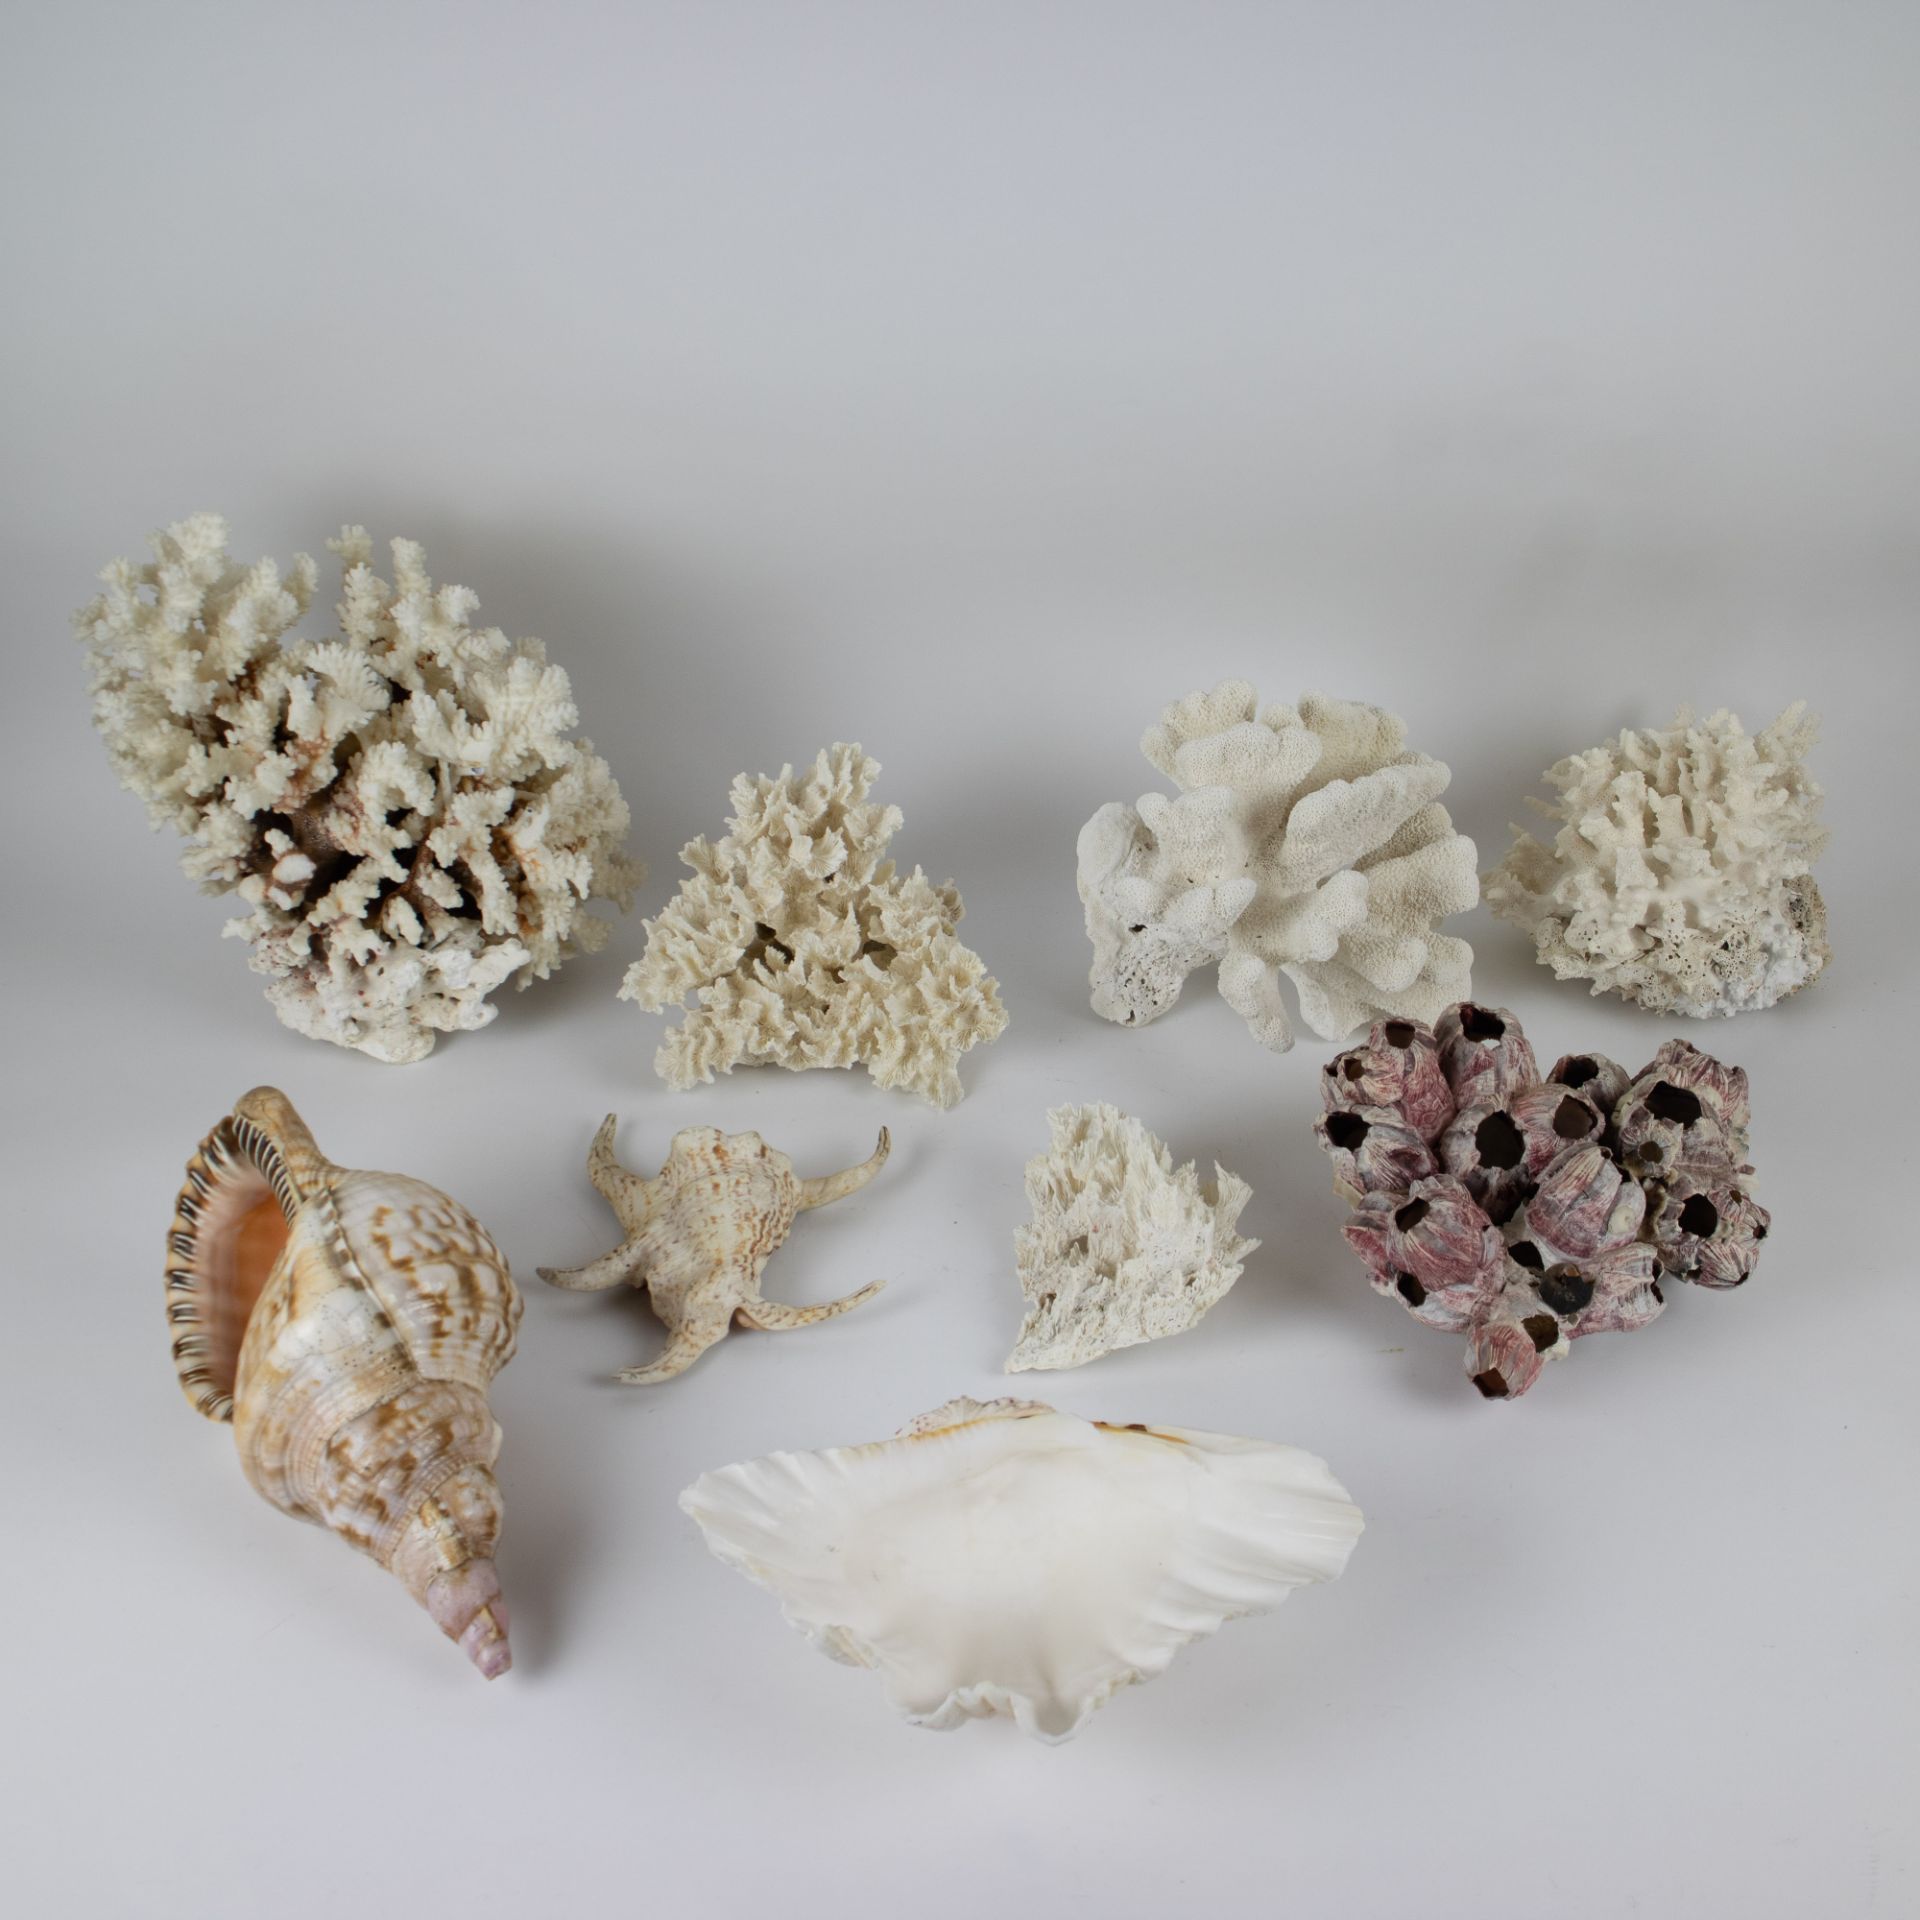 A collection of corals and shells